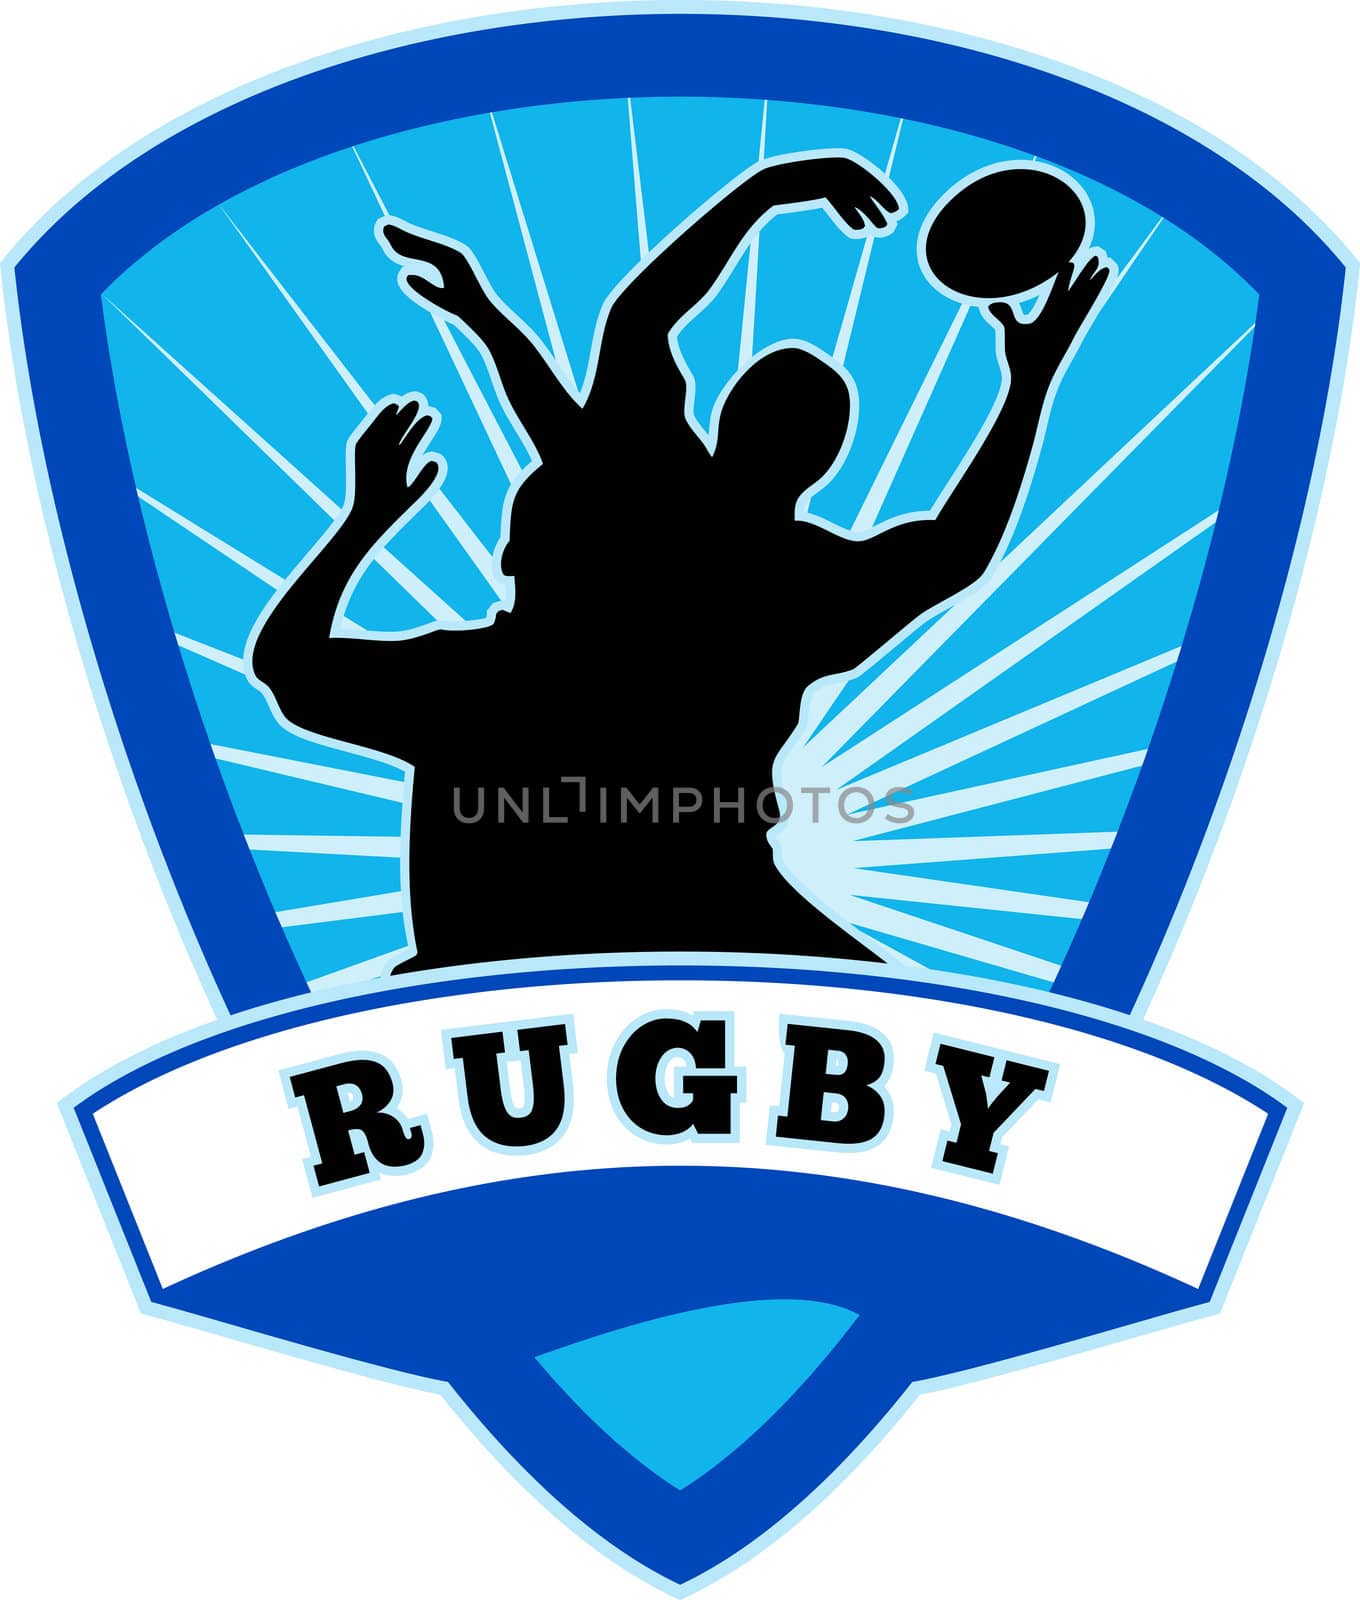 illustration of silhouette of rugby player jumping to catch line-out throw set inside shield with words rugby"